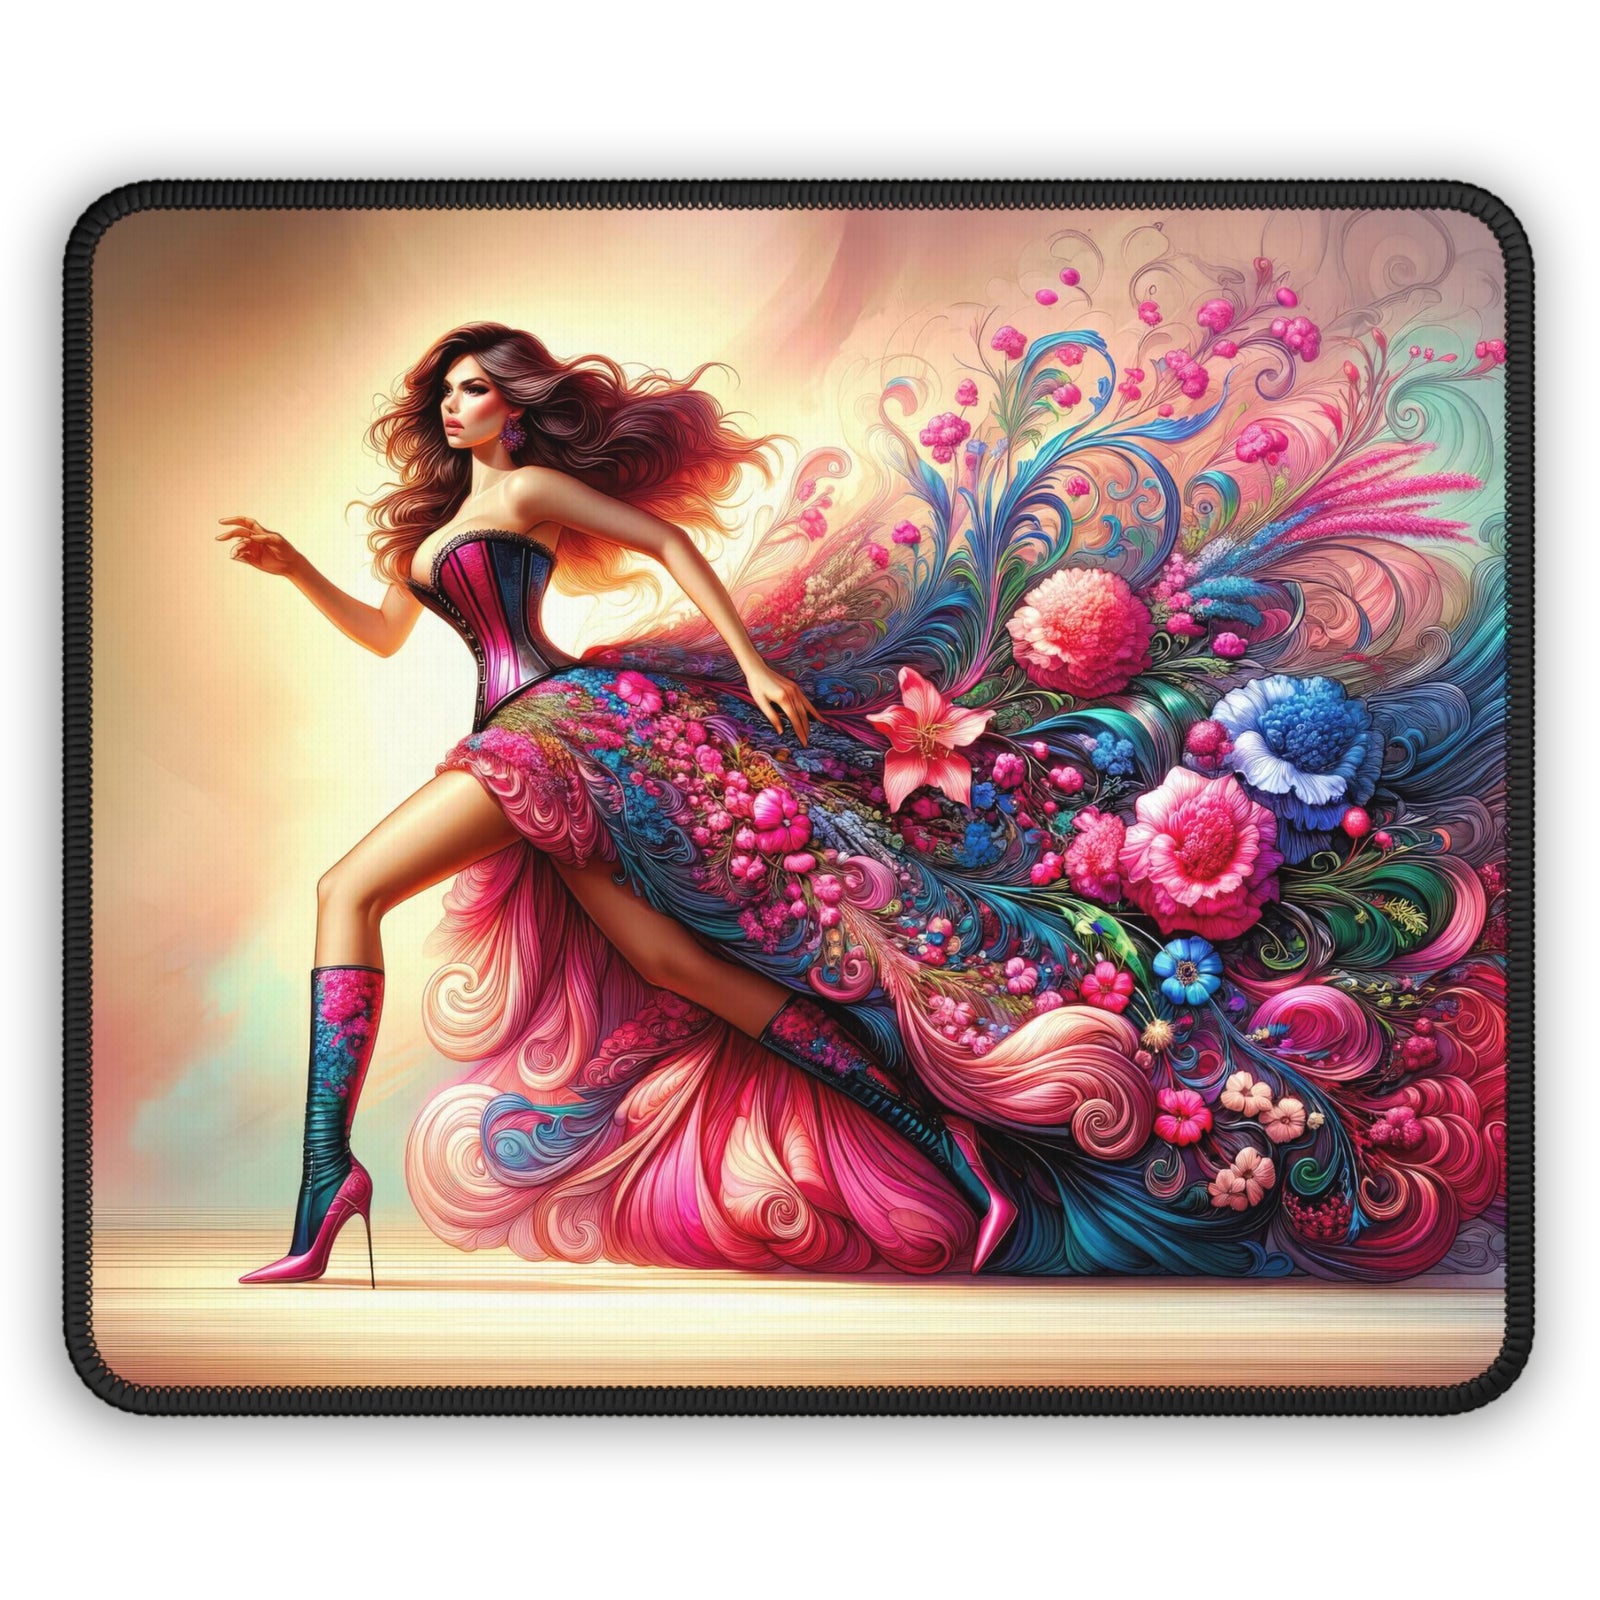 Floral Elegance in Motion Gaming Mouse Pad